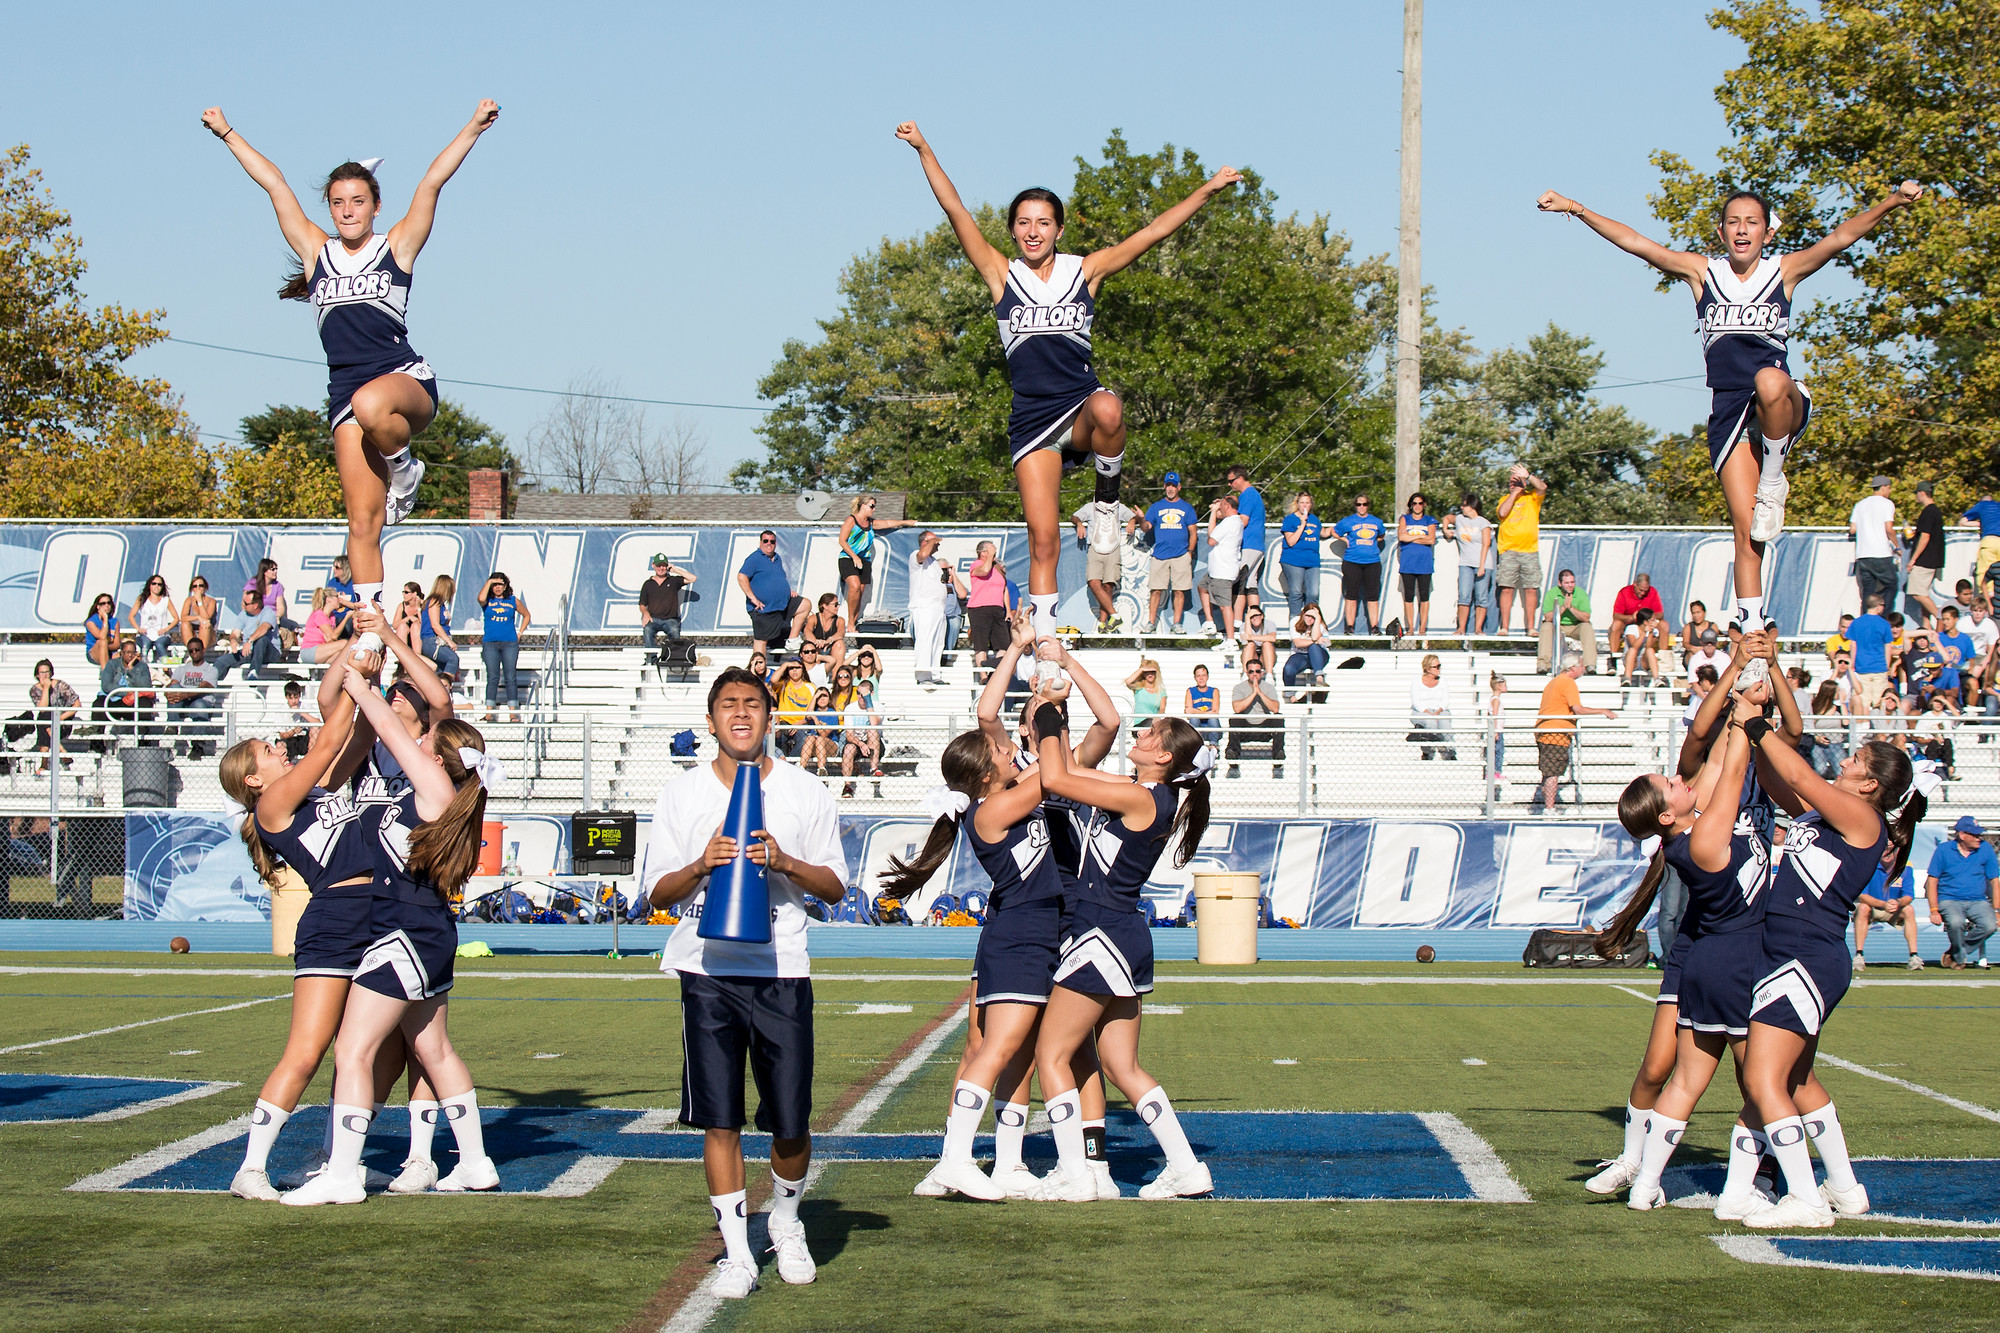 There was plenty to cheer about during Oceanside’s Homecoming festivities last weekend.